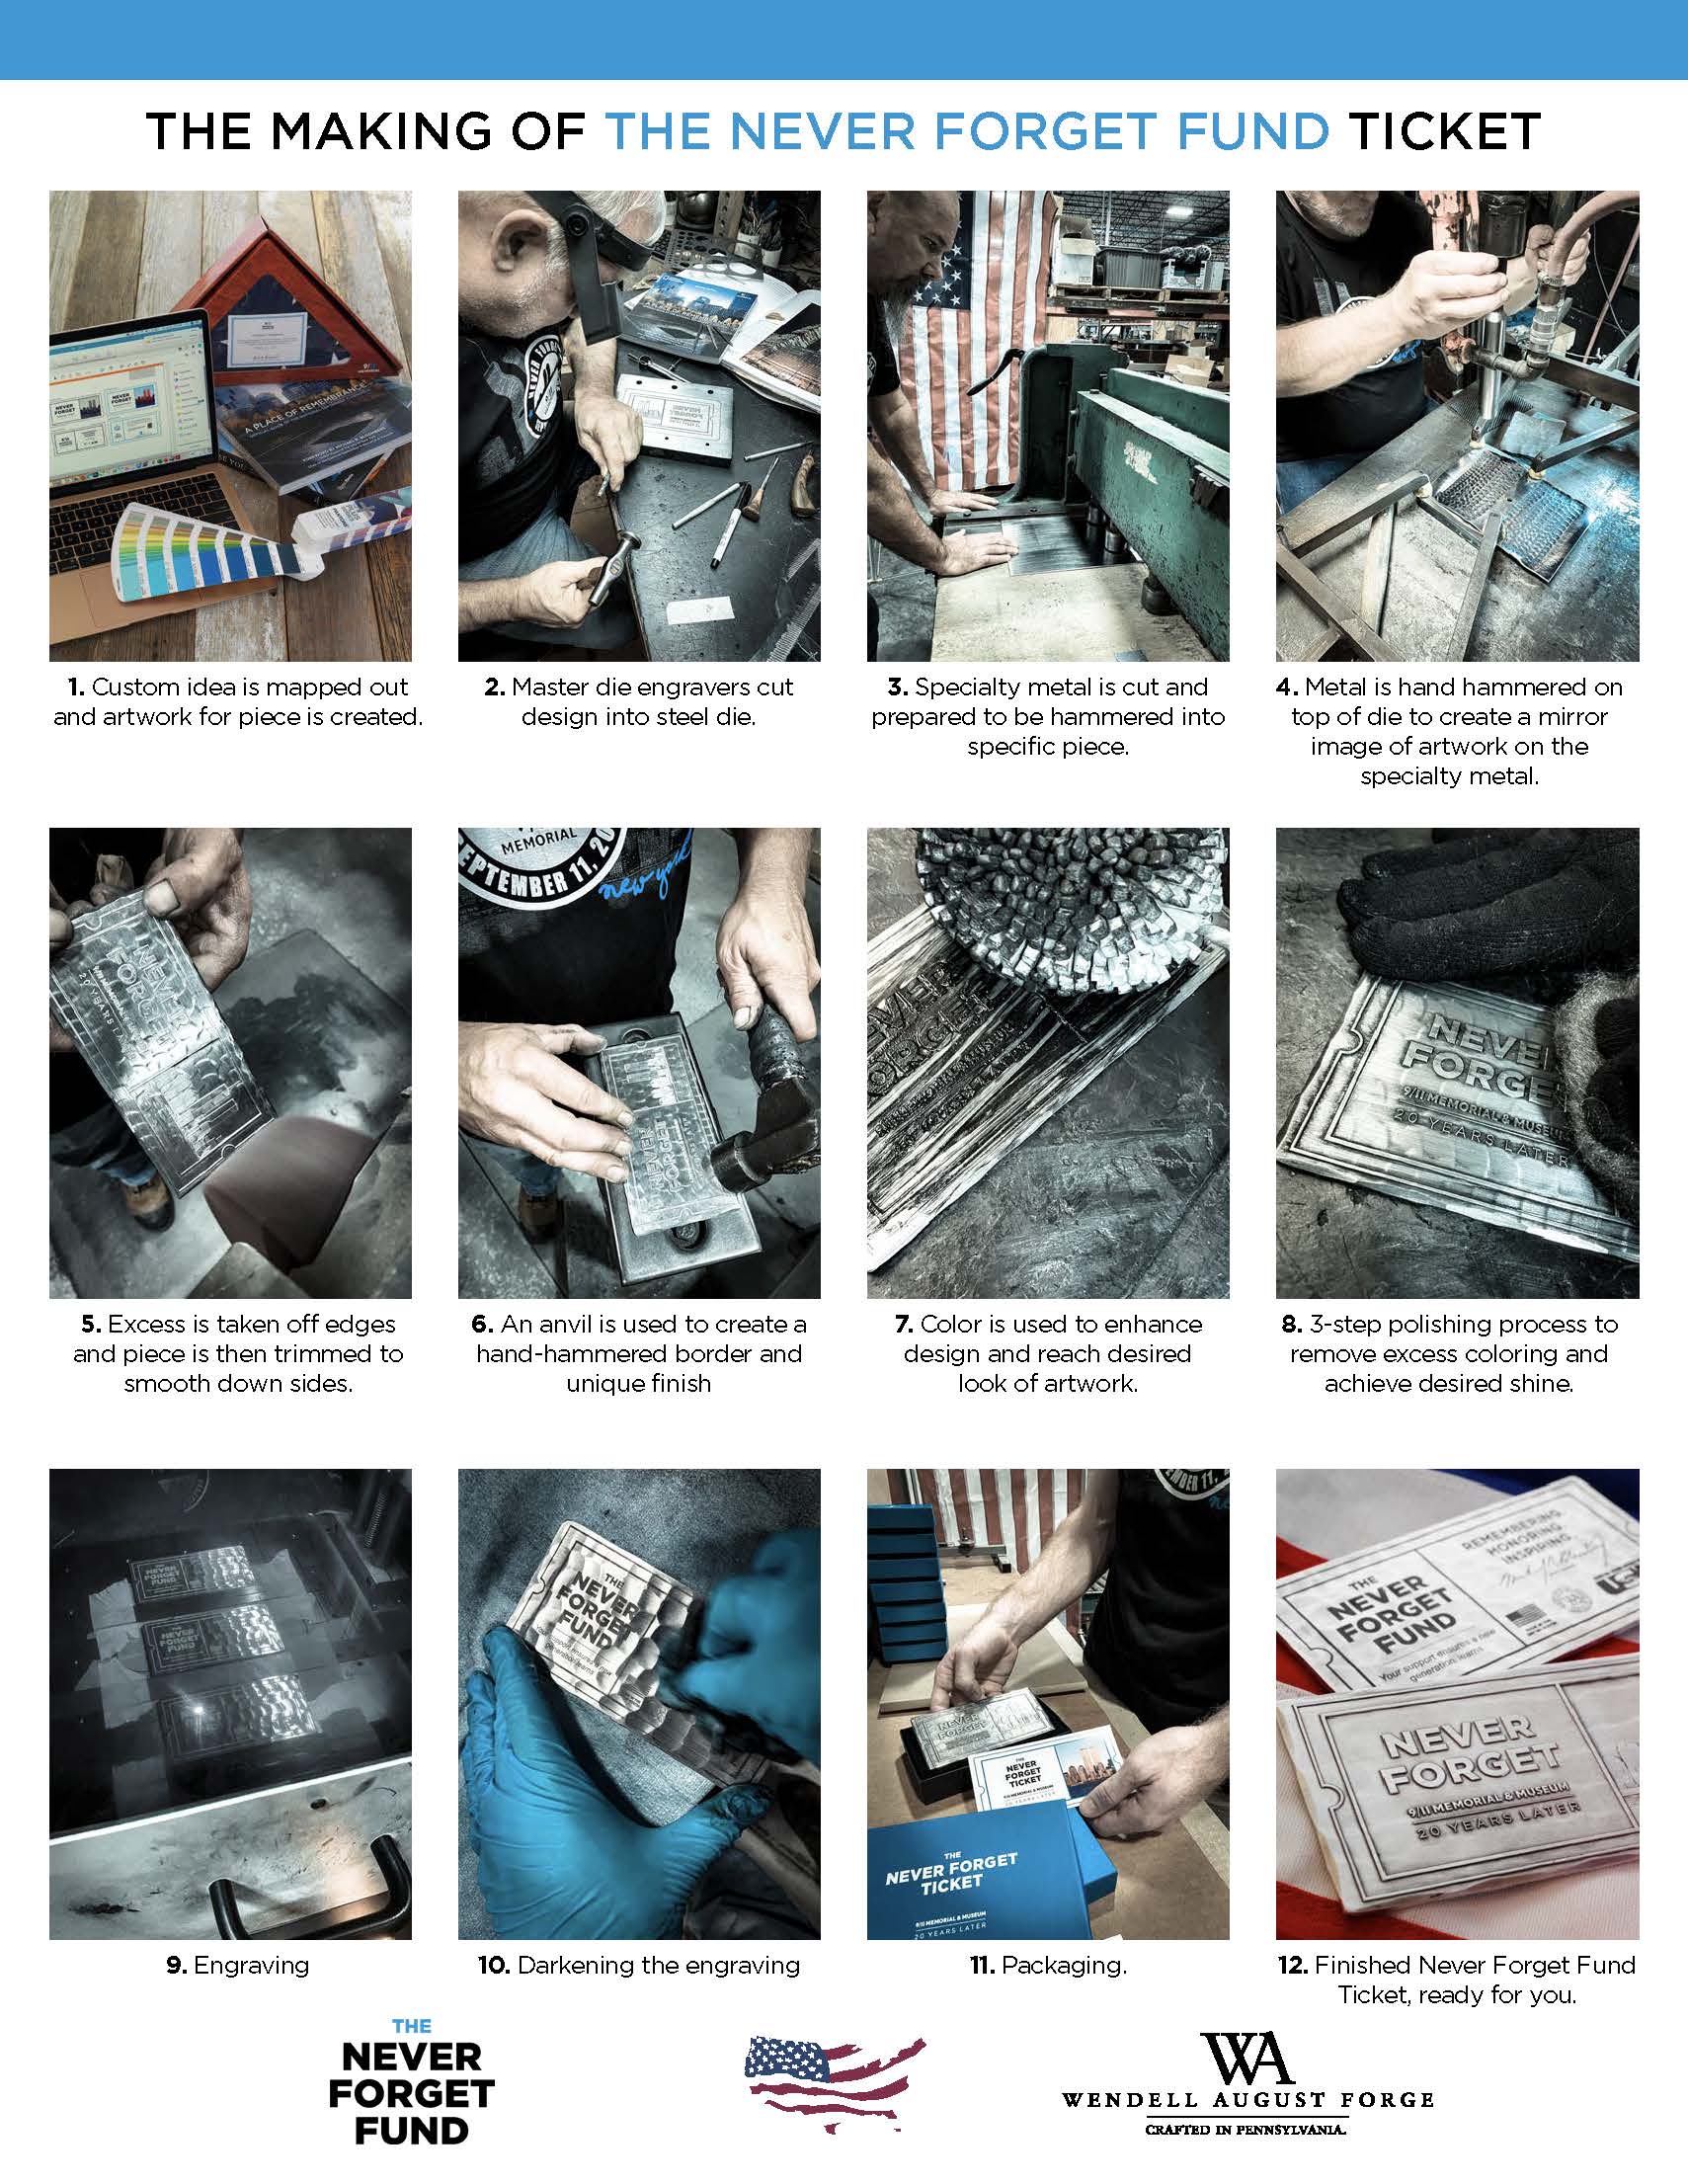 Three rows of four images each, showing different stages of the making of the commemorative ticket. 